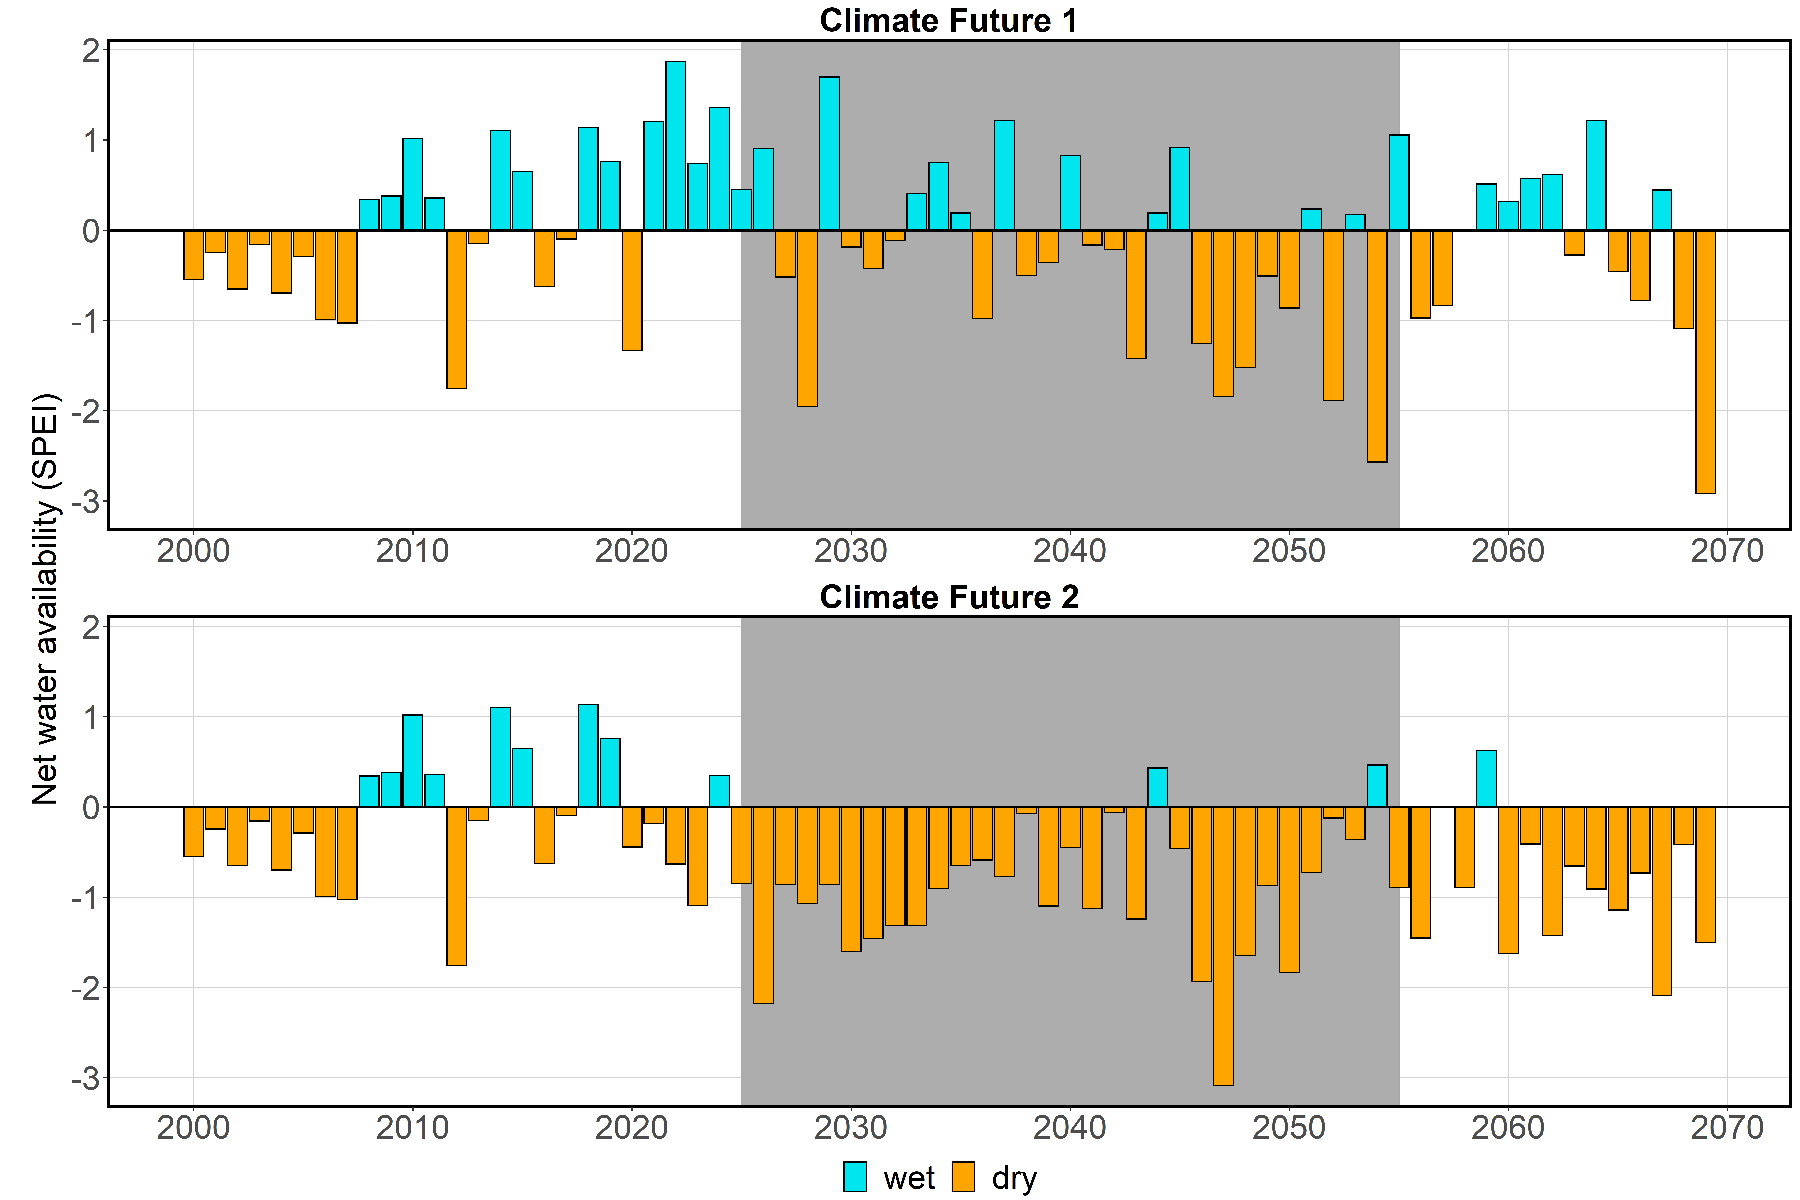 wo bar graphs showing net water availability from 2020 to 2070: upper graph depicts Climate Future 1; lower graph depicts Climate Future 2. Bars are colored blue for wet and orange for dry. Y axis goes from -3 to 2.